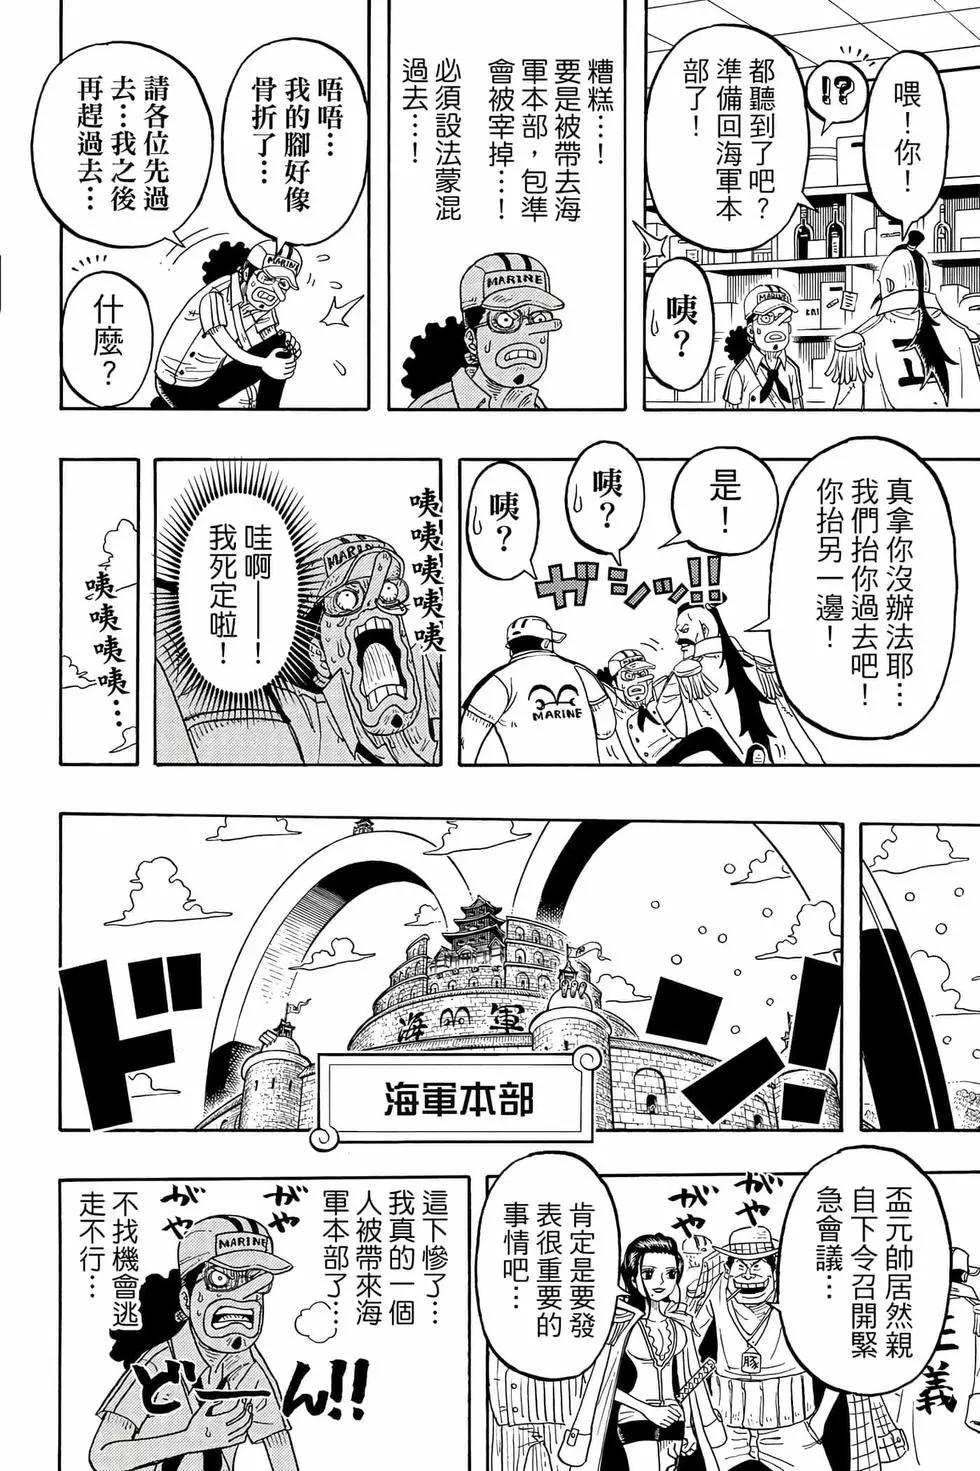 One piece party - 第04卷(1/4) - 7